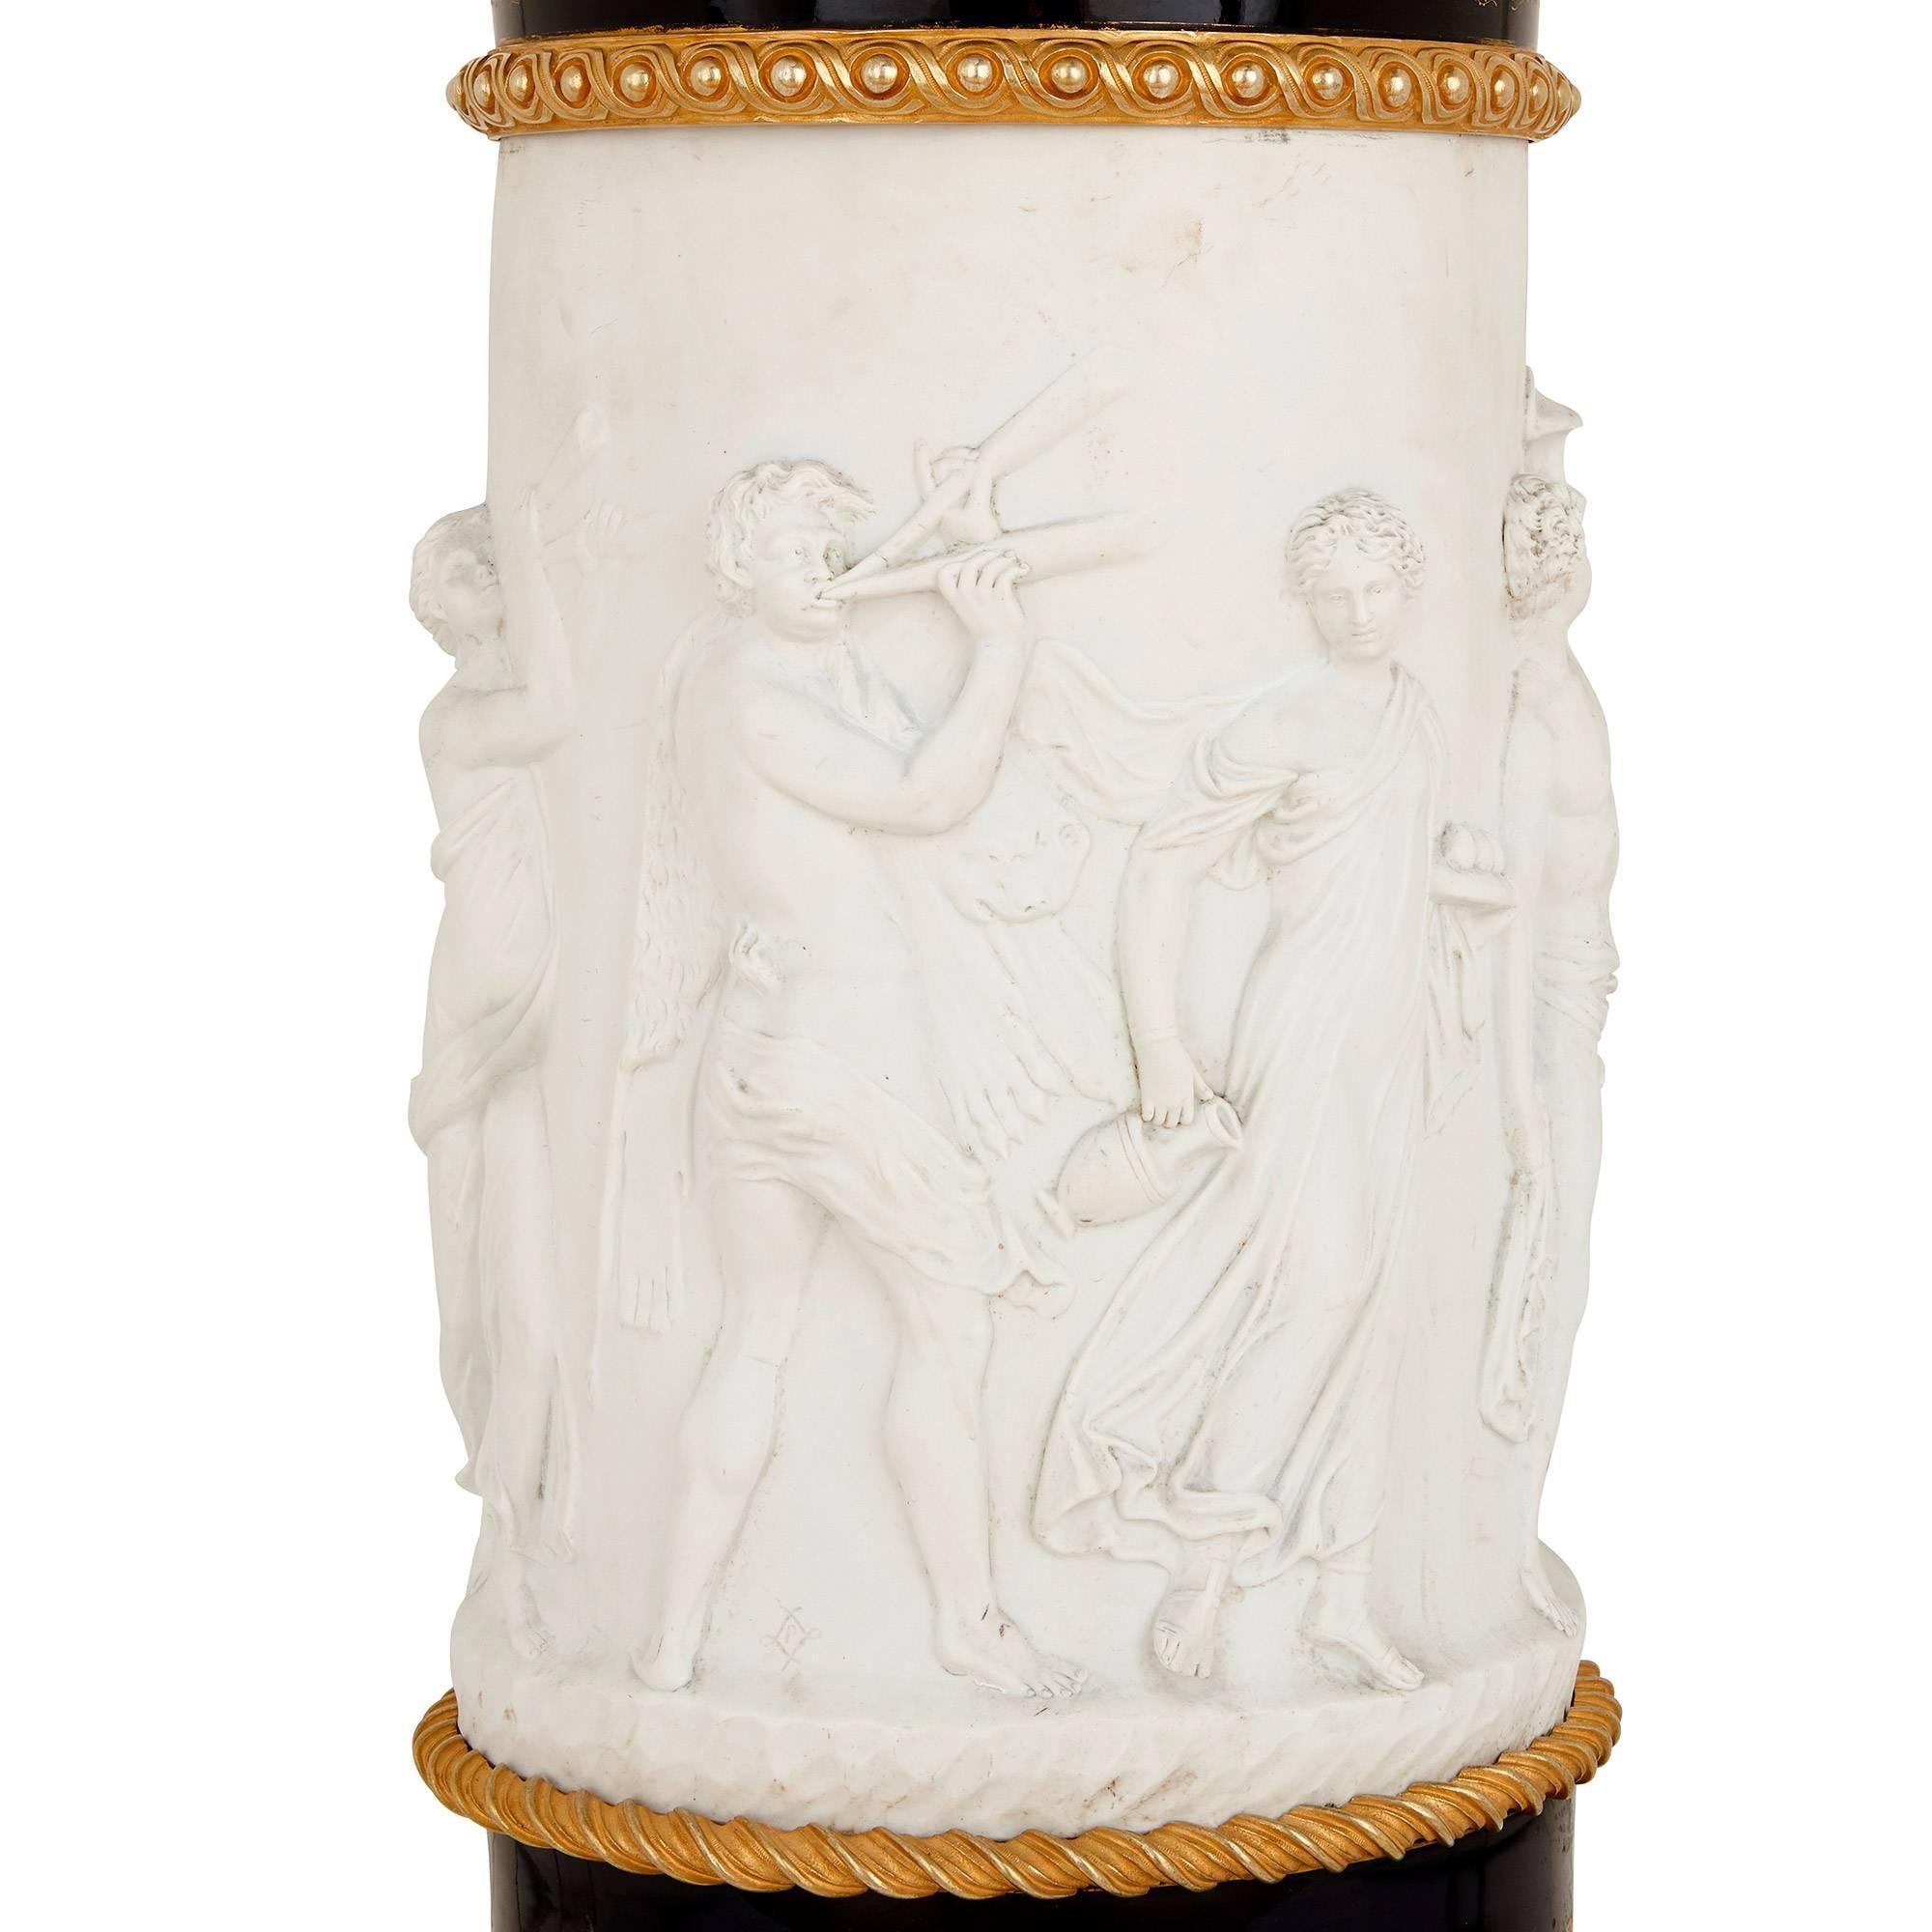 This unique pedestal is crafted from a combination of glazed and unglazed porcelain, mounted elegantly with gilt bronze. The unglazed porcelain - known as biscuit (or bisque) porcelain - is white in colour and has a matte finish, contrasting